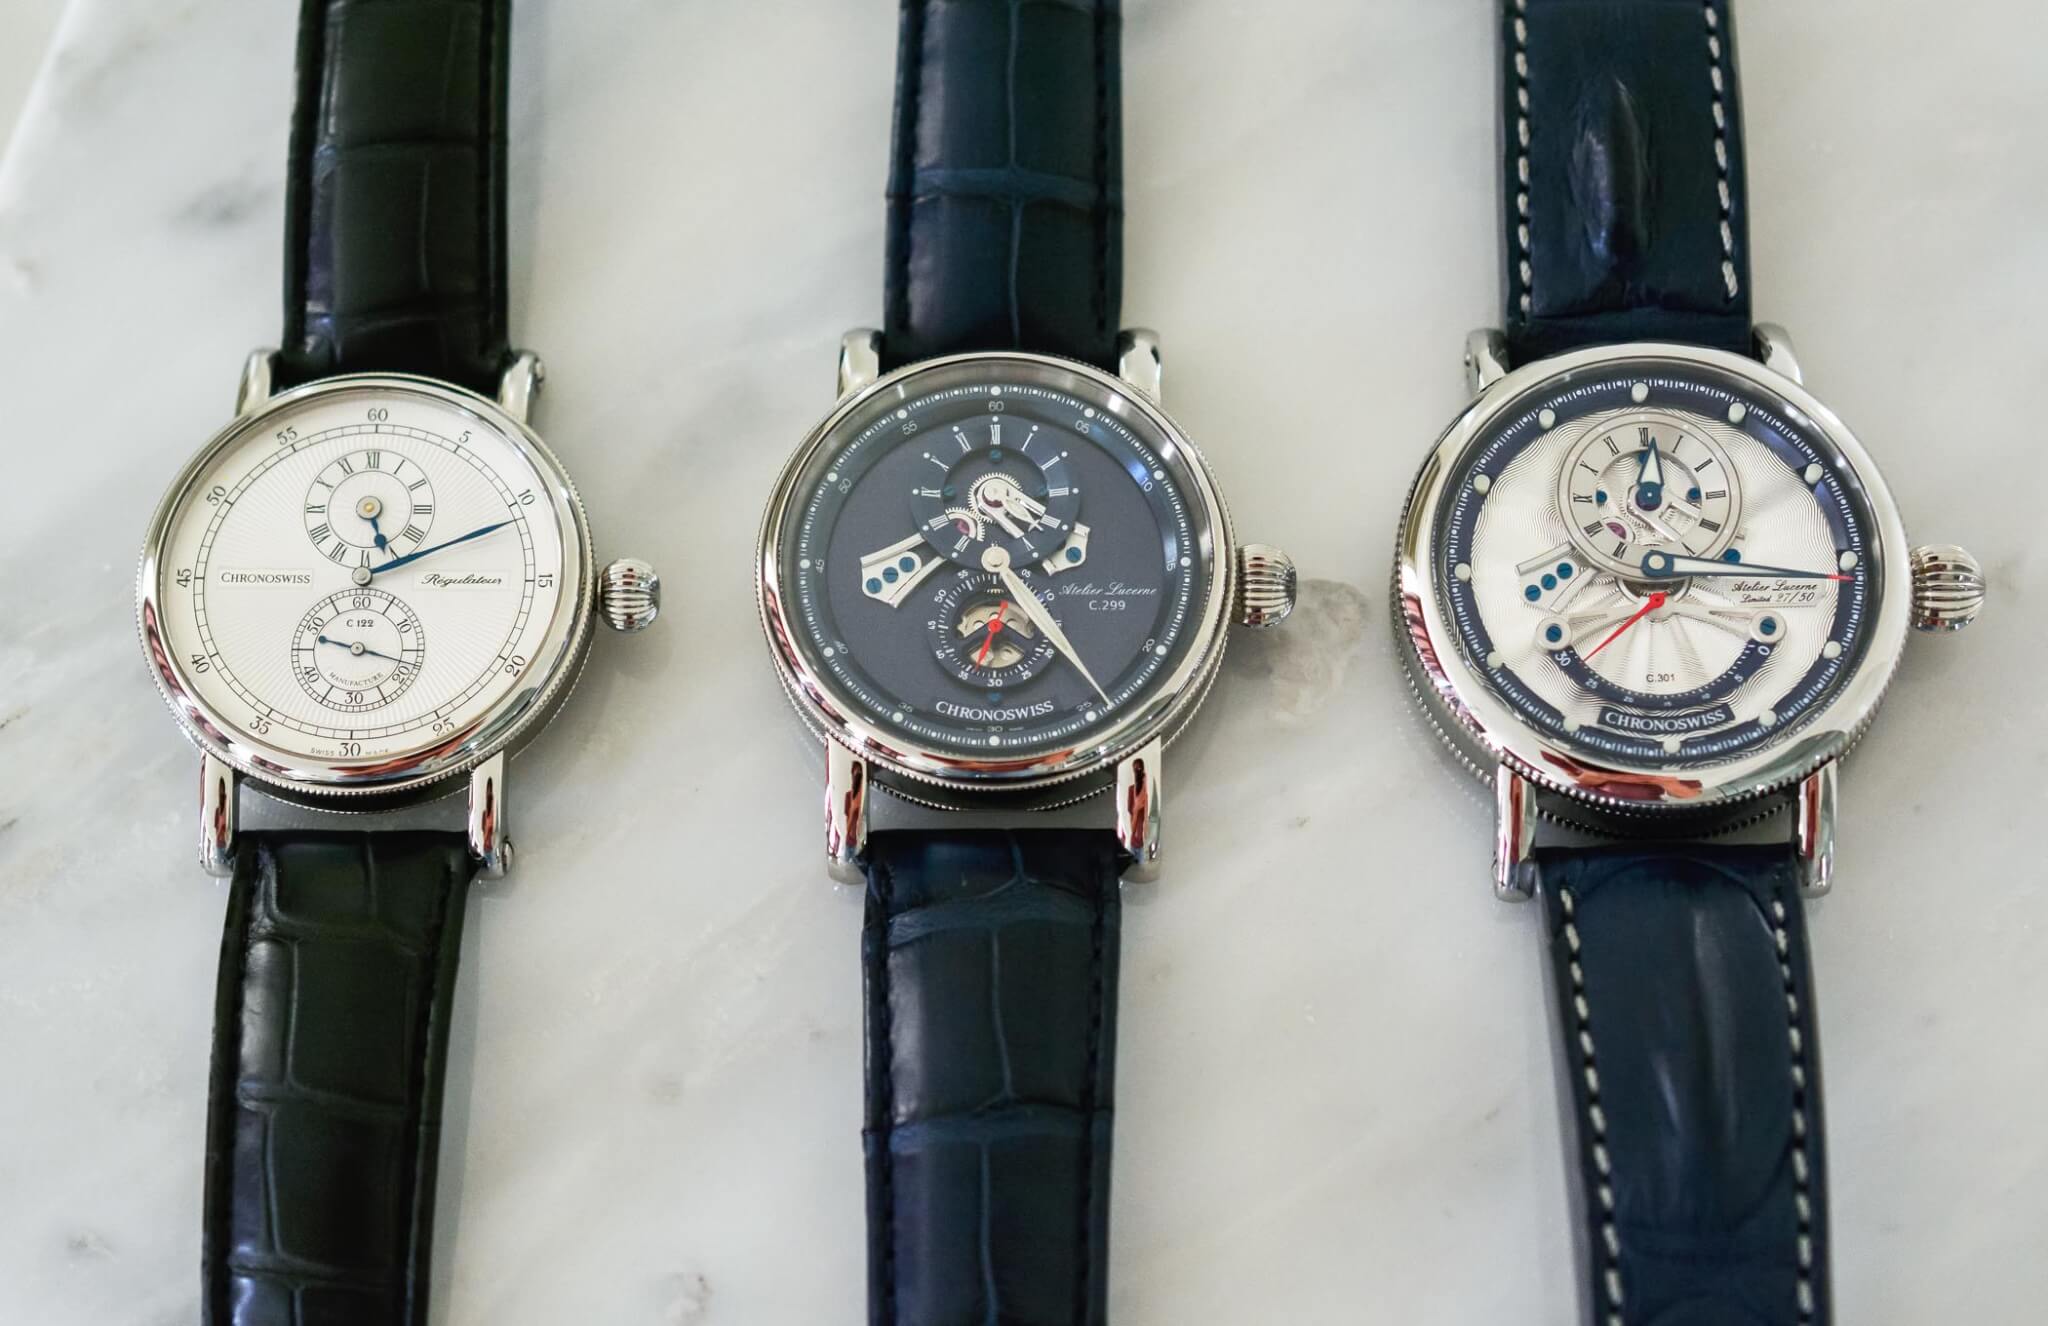 Chronograph Watches Unveiled: Everything You Need to Know